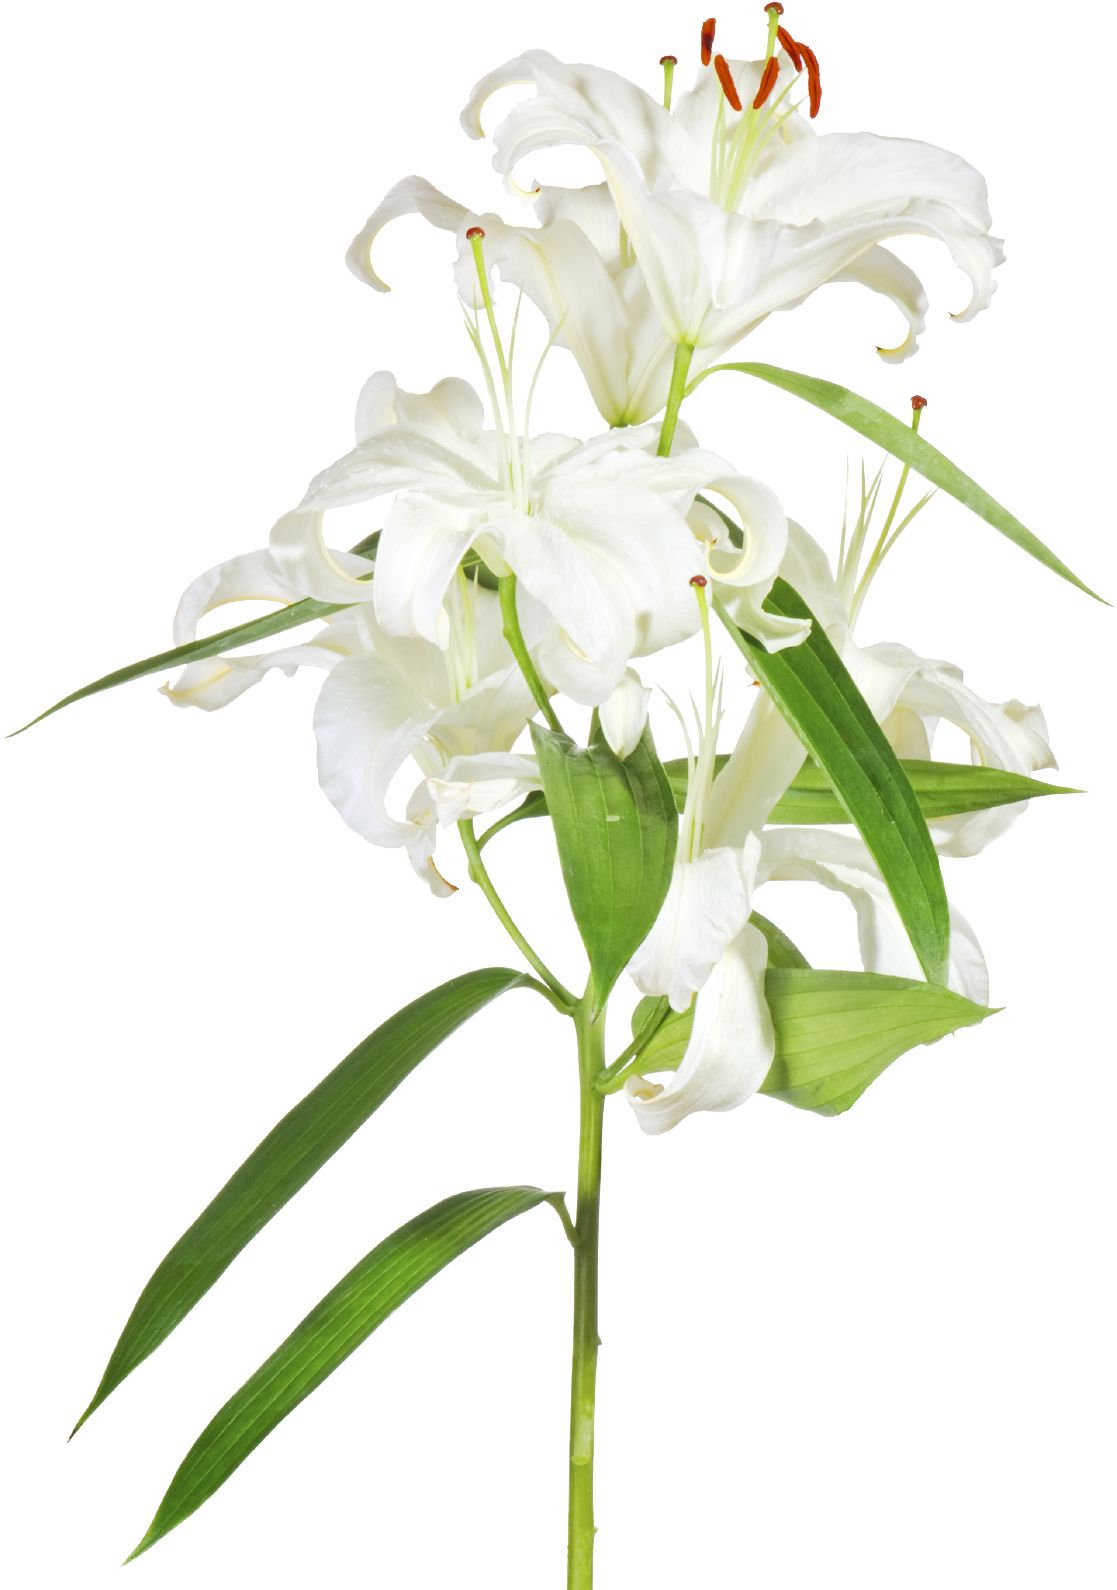 A White Lily With Green Leaves